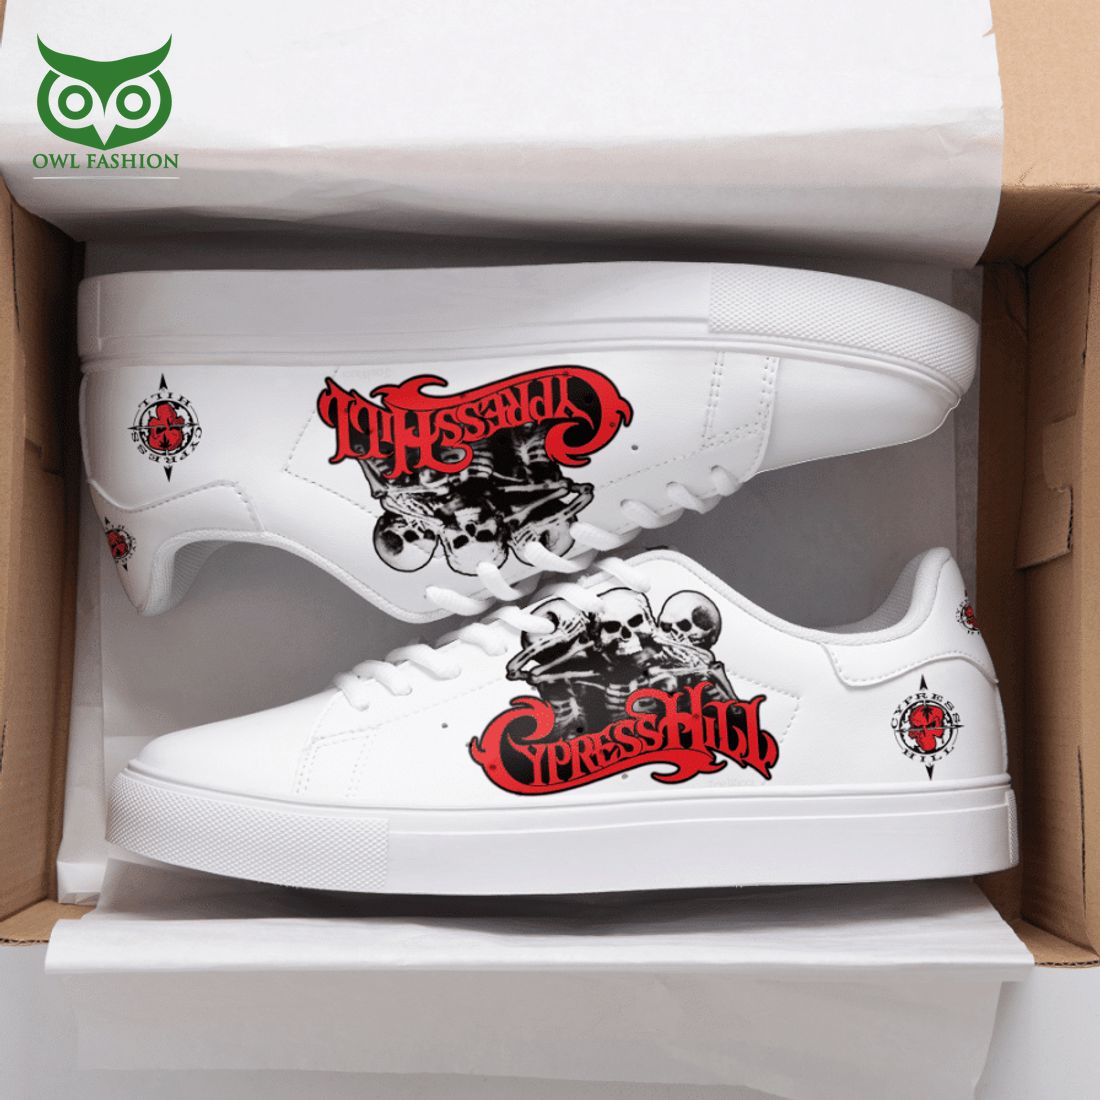 cypress hill skull red 3d printed stan smith shoes 1 OGoR9